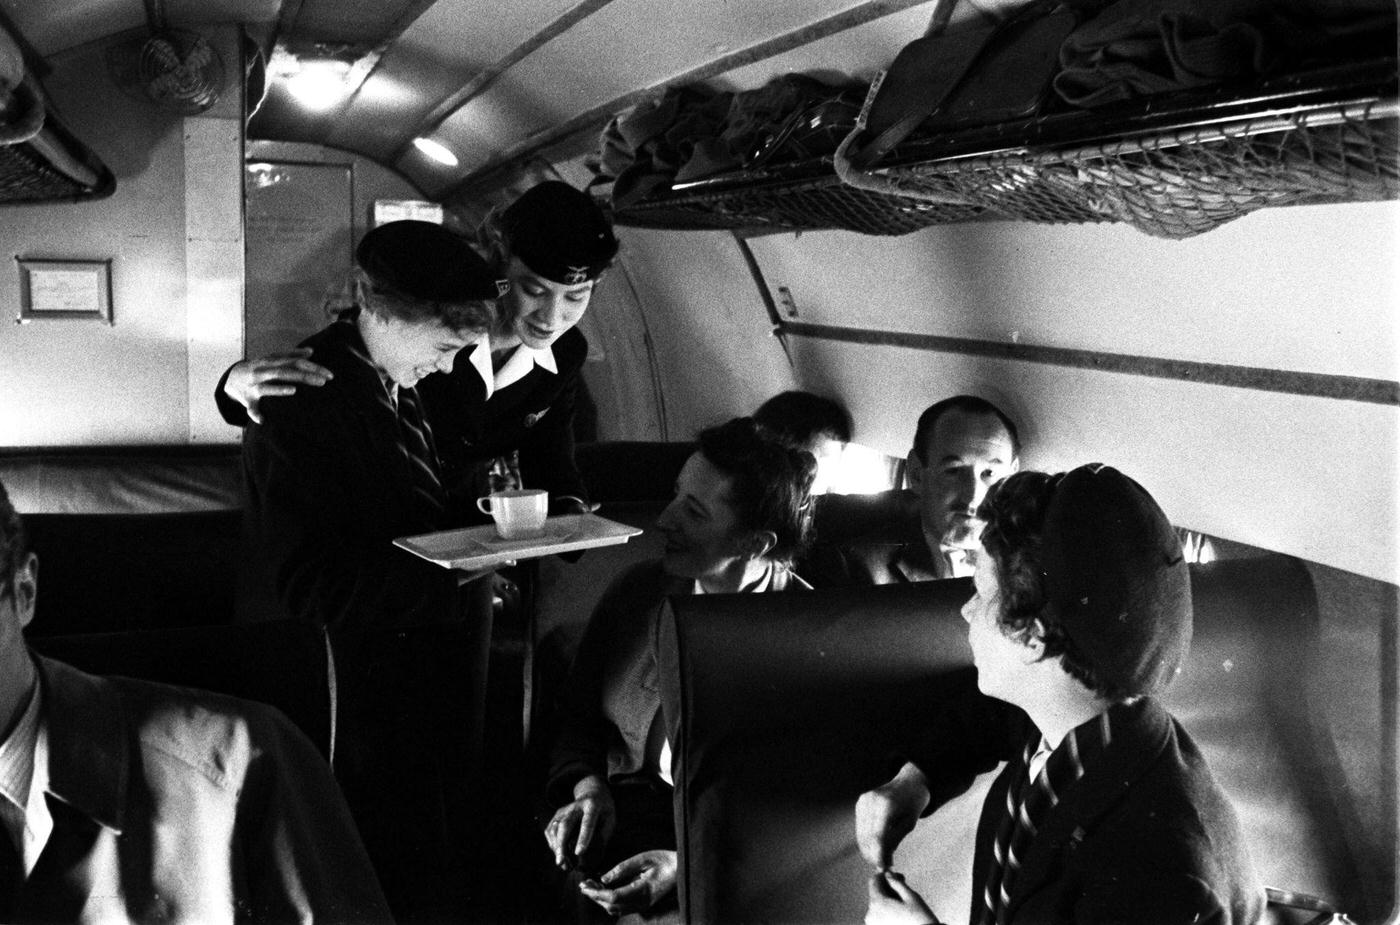 Air hostesses are captured serving passengers on a plane in 1955.